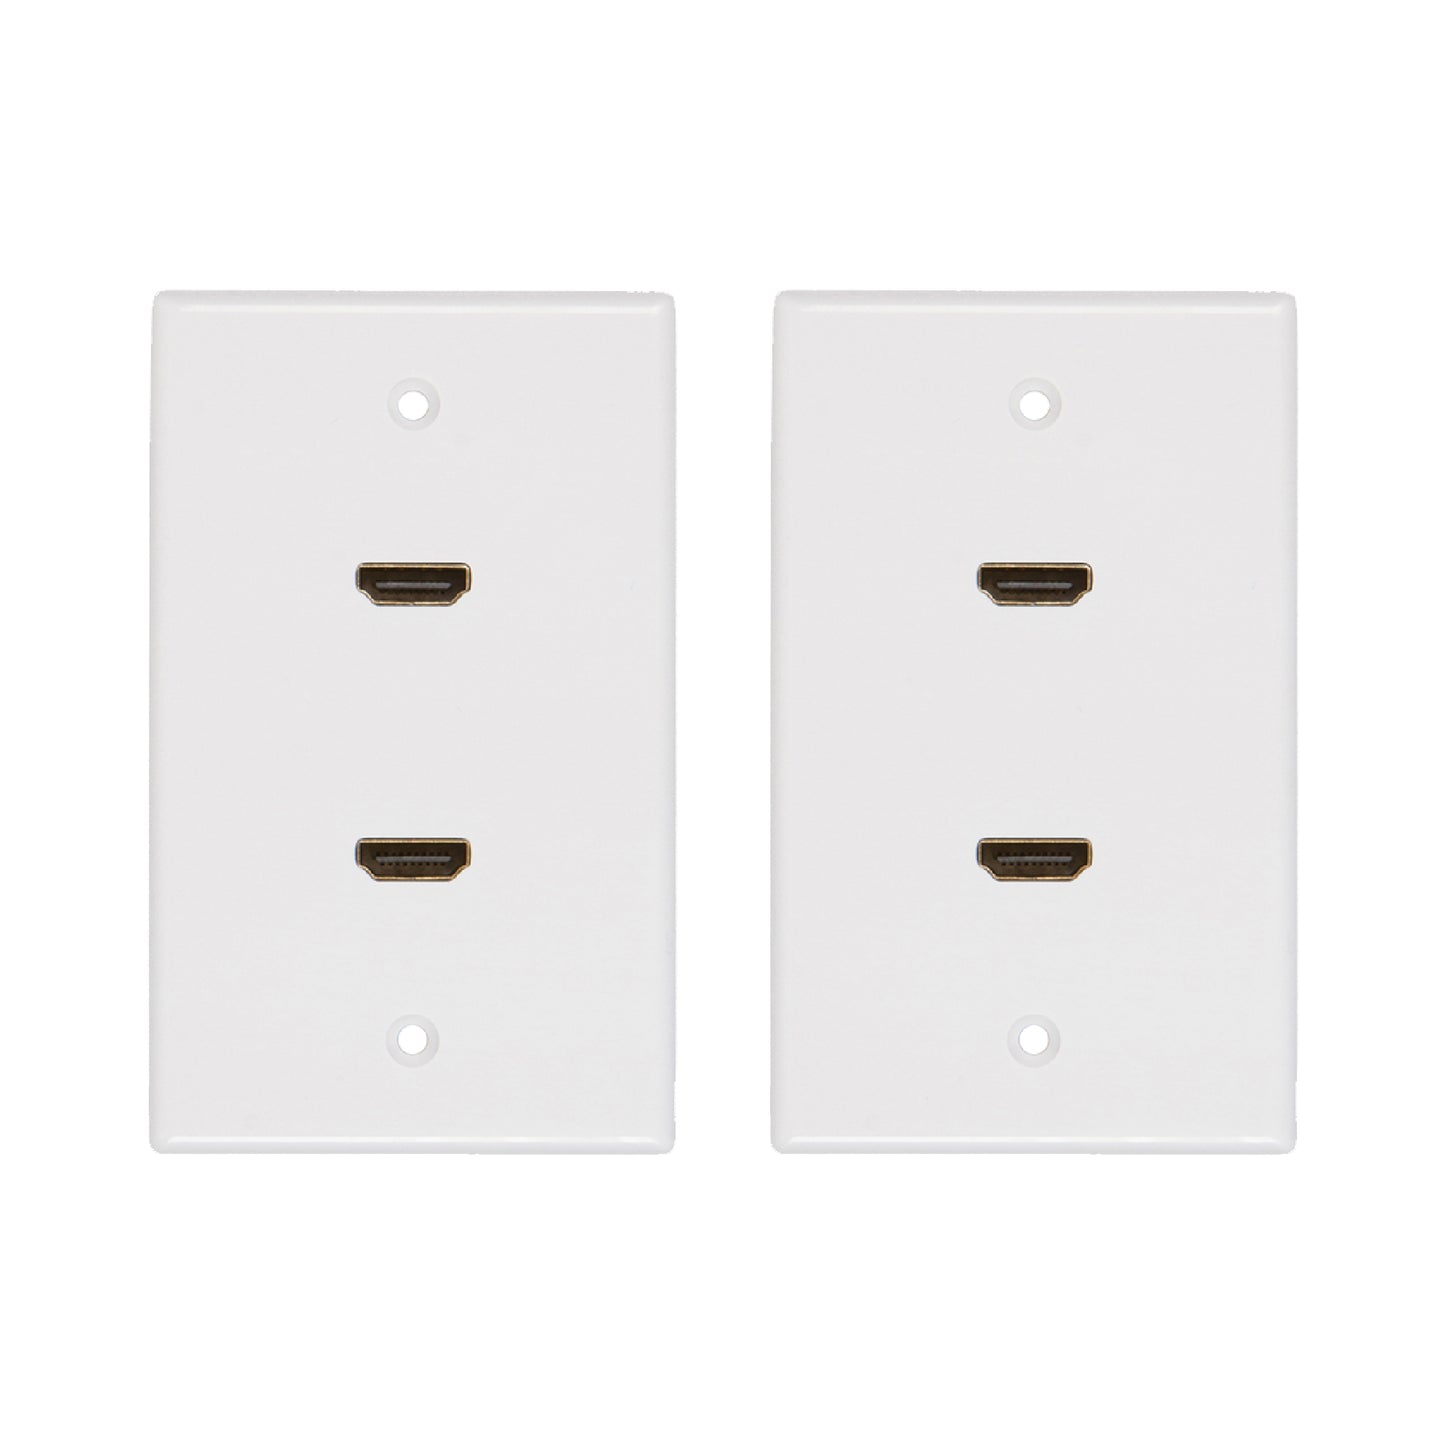 2 Port HDMI Wall Plate [UL Listed] Insert Built-in Hi-Speed HDMI Cable with Ethernet- Decora Style Jack/Plug for Outlet Port (White 2 Port) - Milena International Inc